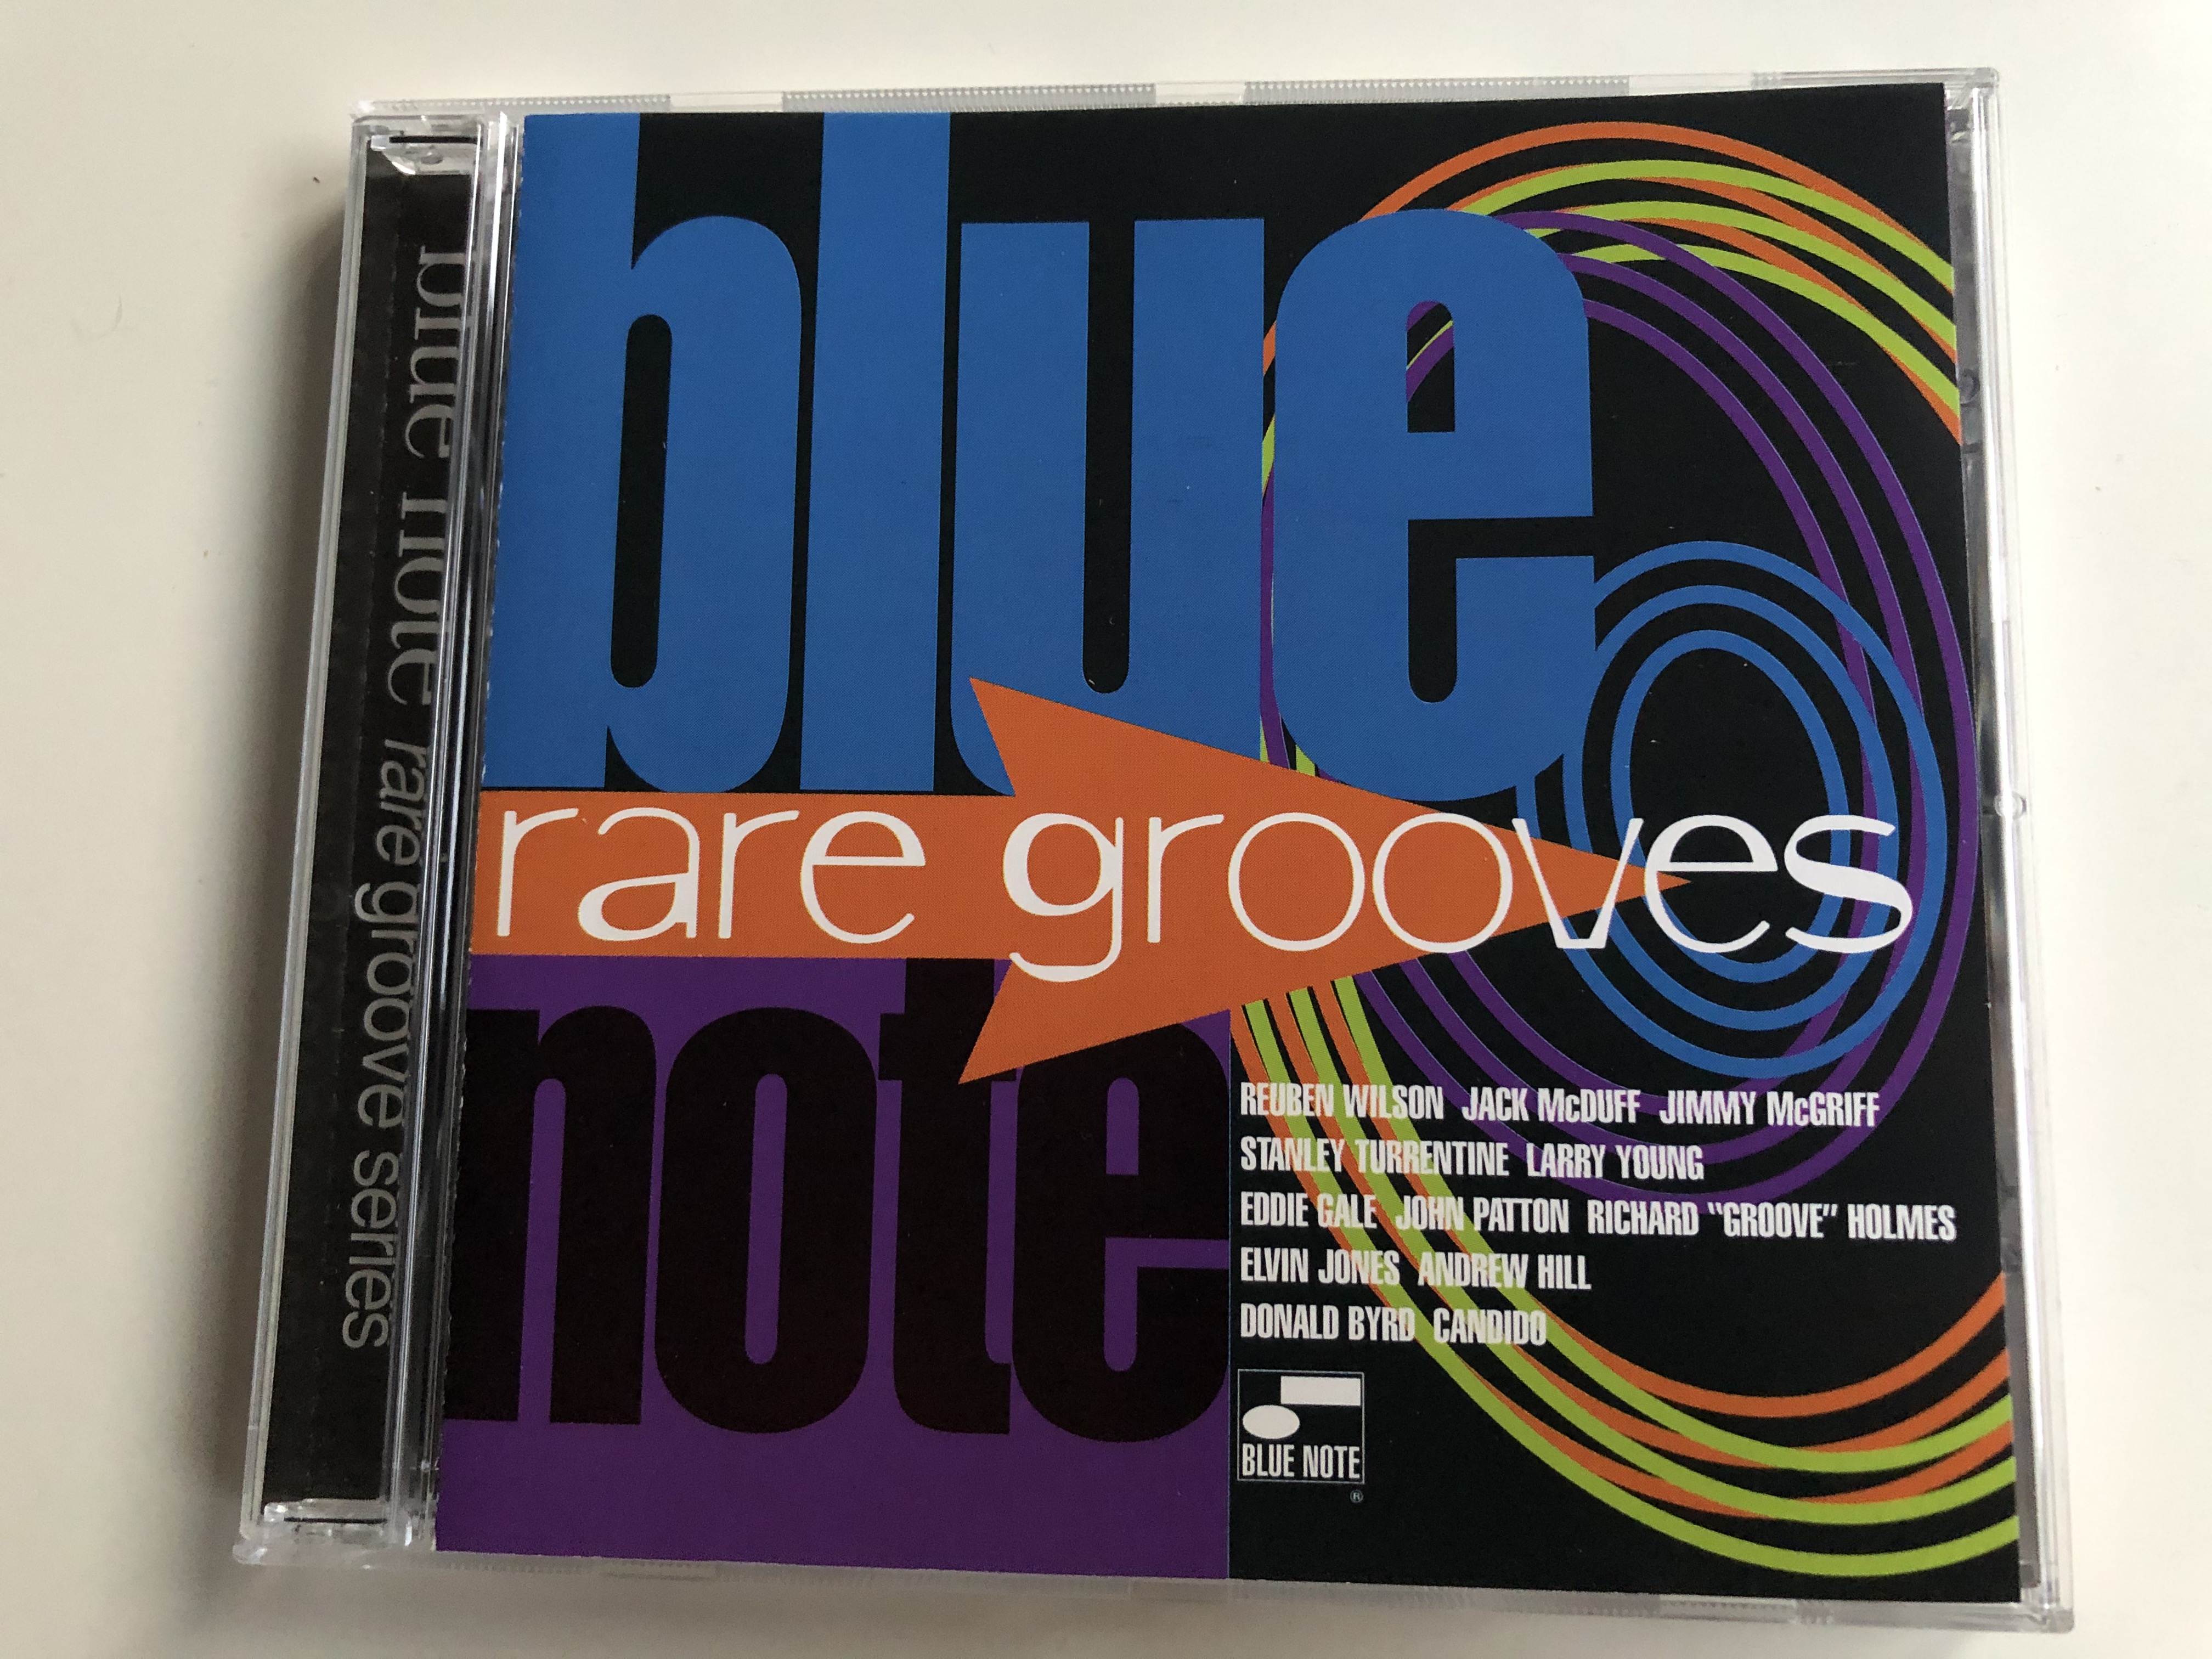 blue-note-rare-grooves-reuben-wilson-jack-mcduff-jimmy-mcgriff-stanley-turrentine-larry-young-eddie-gale-john-patton-richard-groove-holmes-elvin-jones-andrew-hill-candido-blue-note-aud-1-.jpg